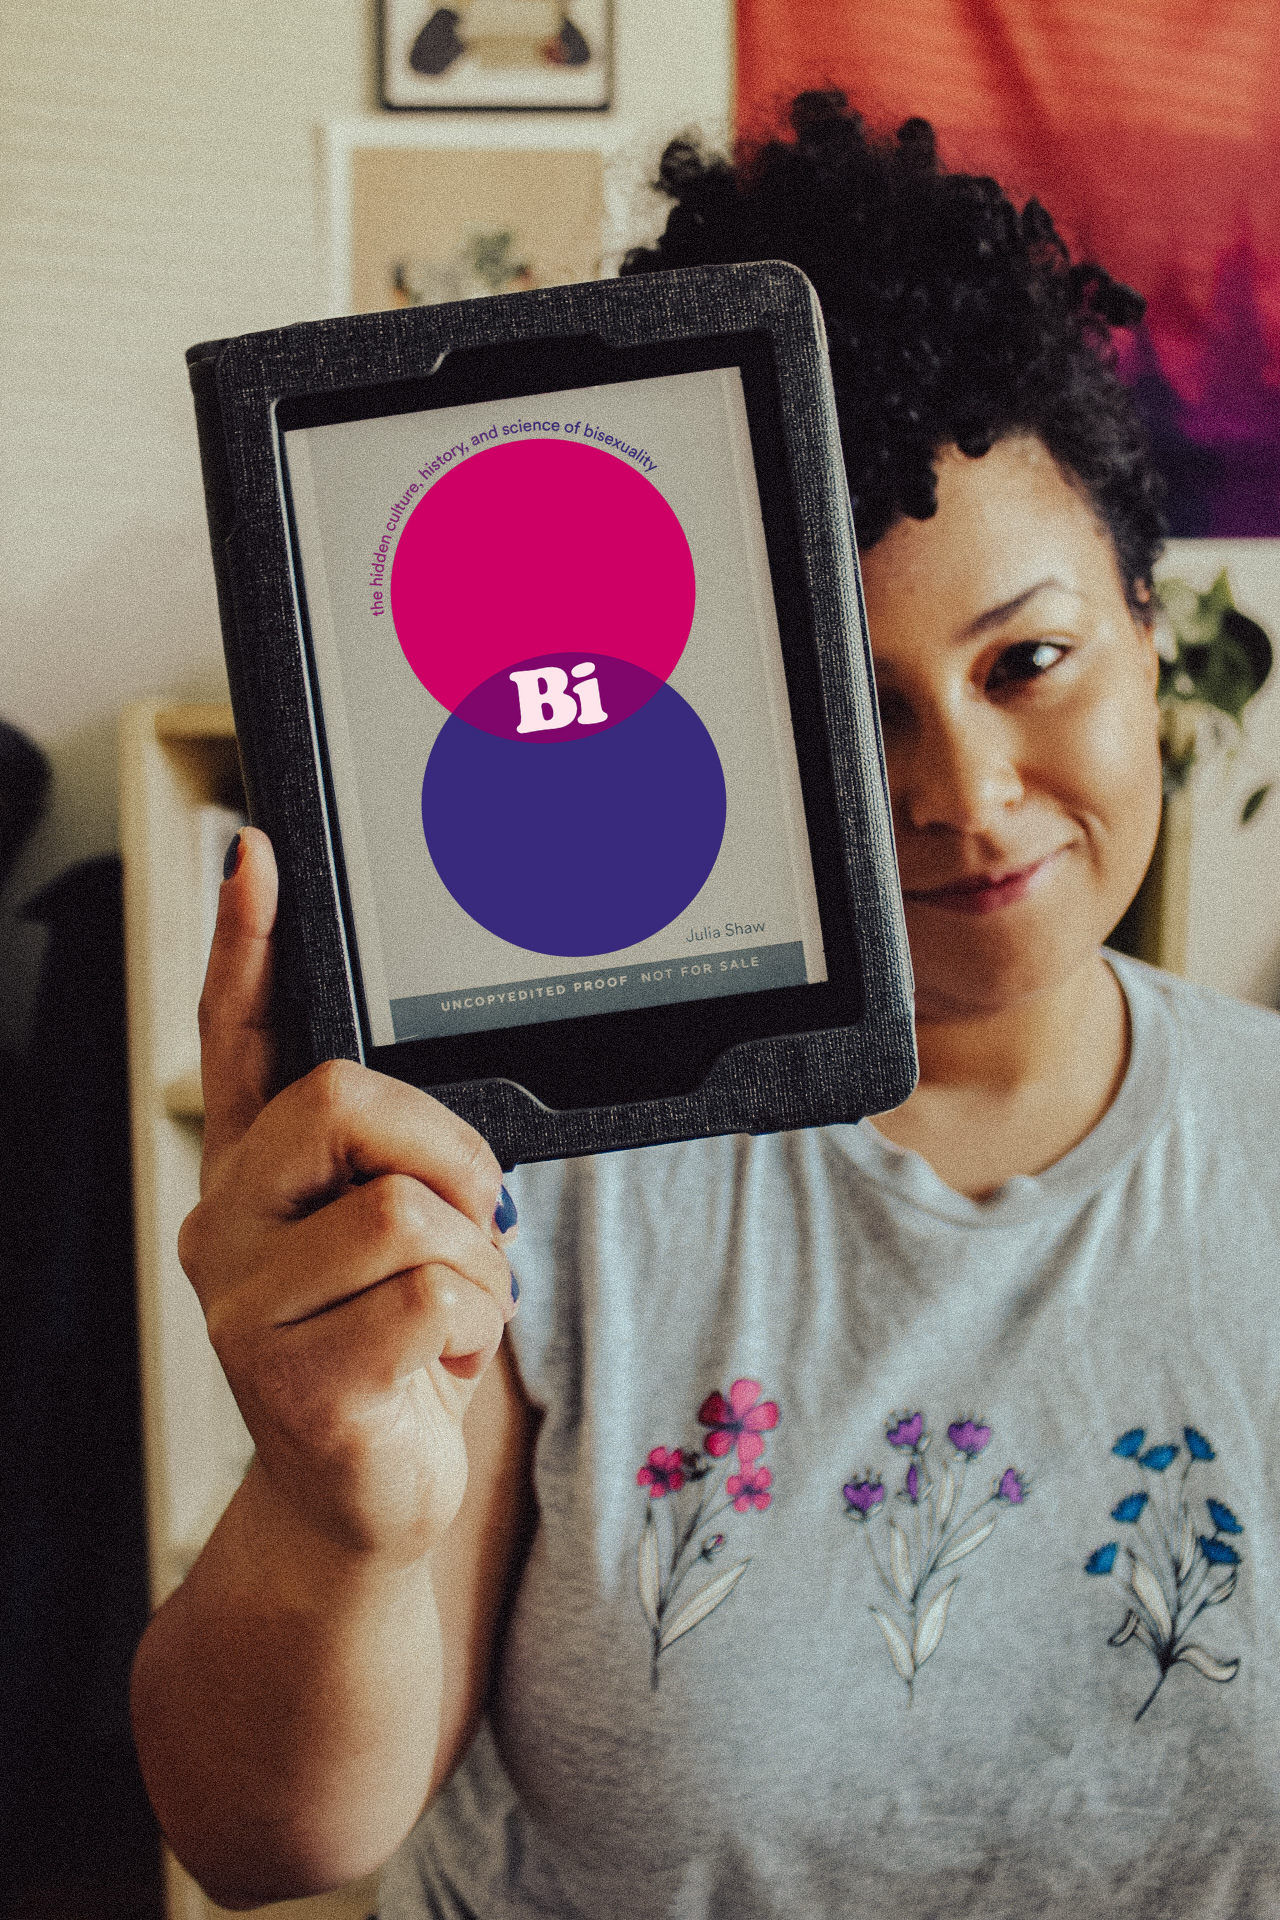 Emily holding up an e-book copy of Bi: The Hidden Culture, History, and Science of Bisexuality by Julia Shaw. Wearing a shirt with the bisexual pride colors for pride month.